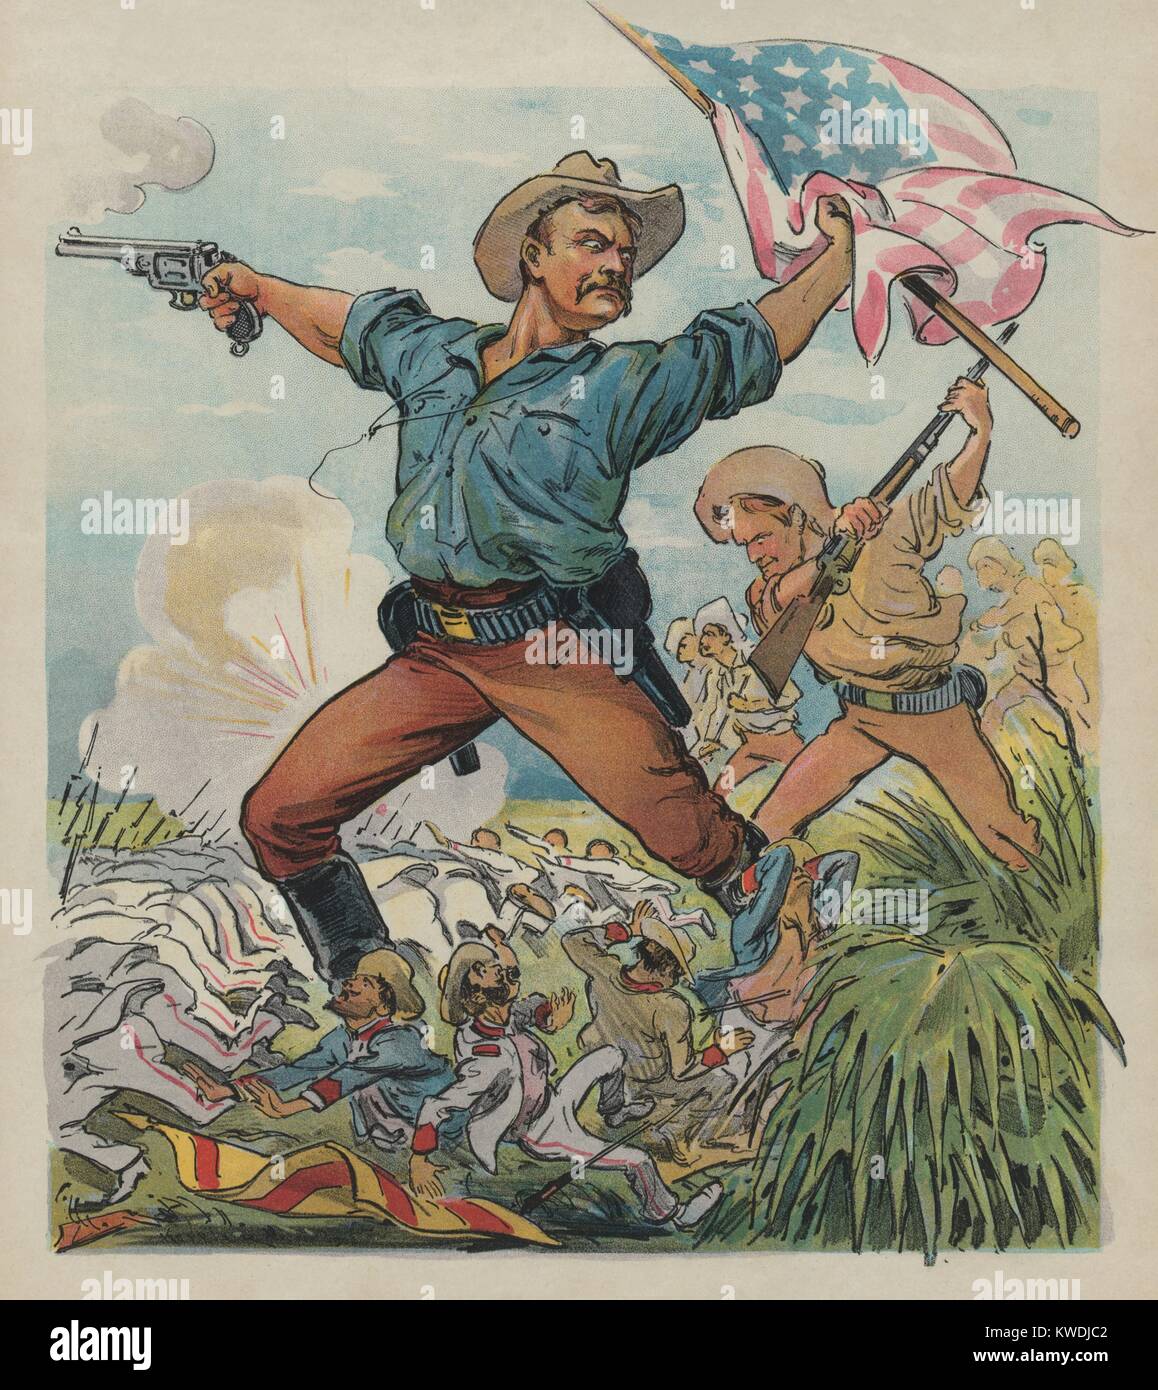 THE ROUGH RIDERS, Puck Magazine illustration, July 27, 1898. The non-factual made-up image in this political cartoon depicts Theodore Roosevelt leading a charge, trampling tiny Spanish soldiers underfoot during the Spanish American War in Cuba (BSLOC 2017 10 38) Stock Photo